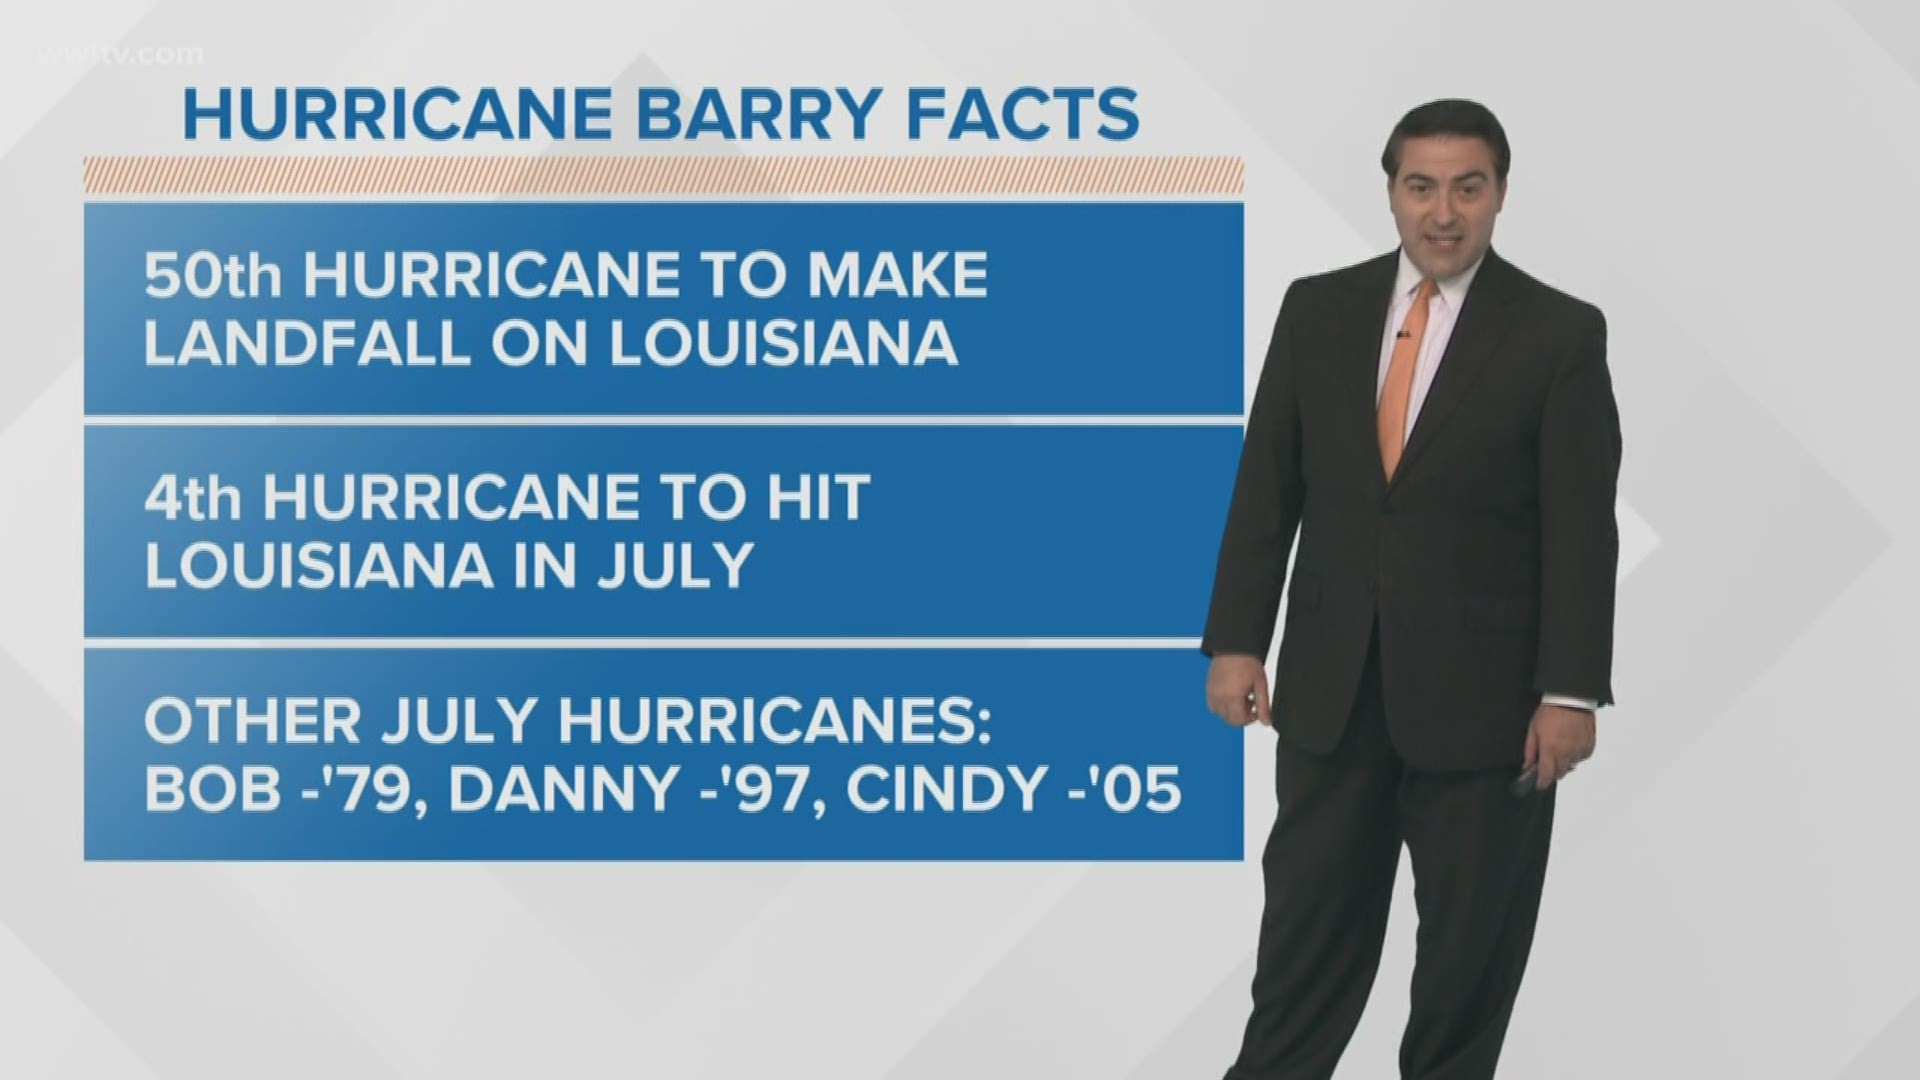 Meteorologist Dave Nussbaum says we will continue to see band of rain from Barry over us today, but we return to more typical July weather tomorrow.